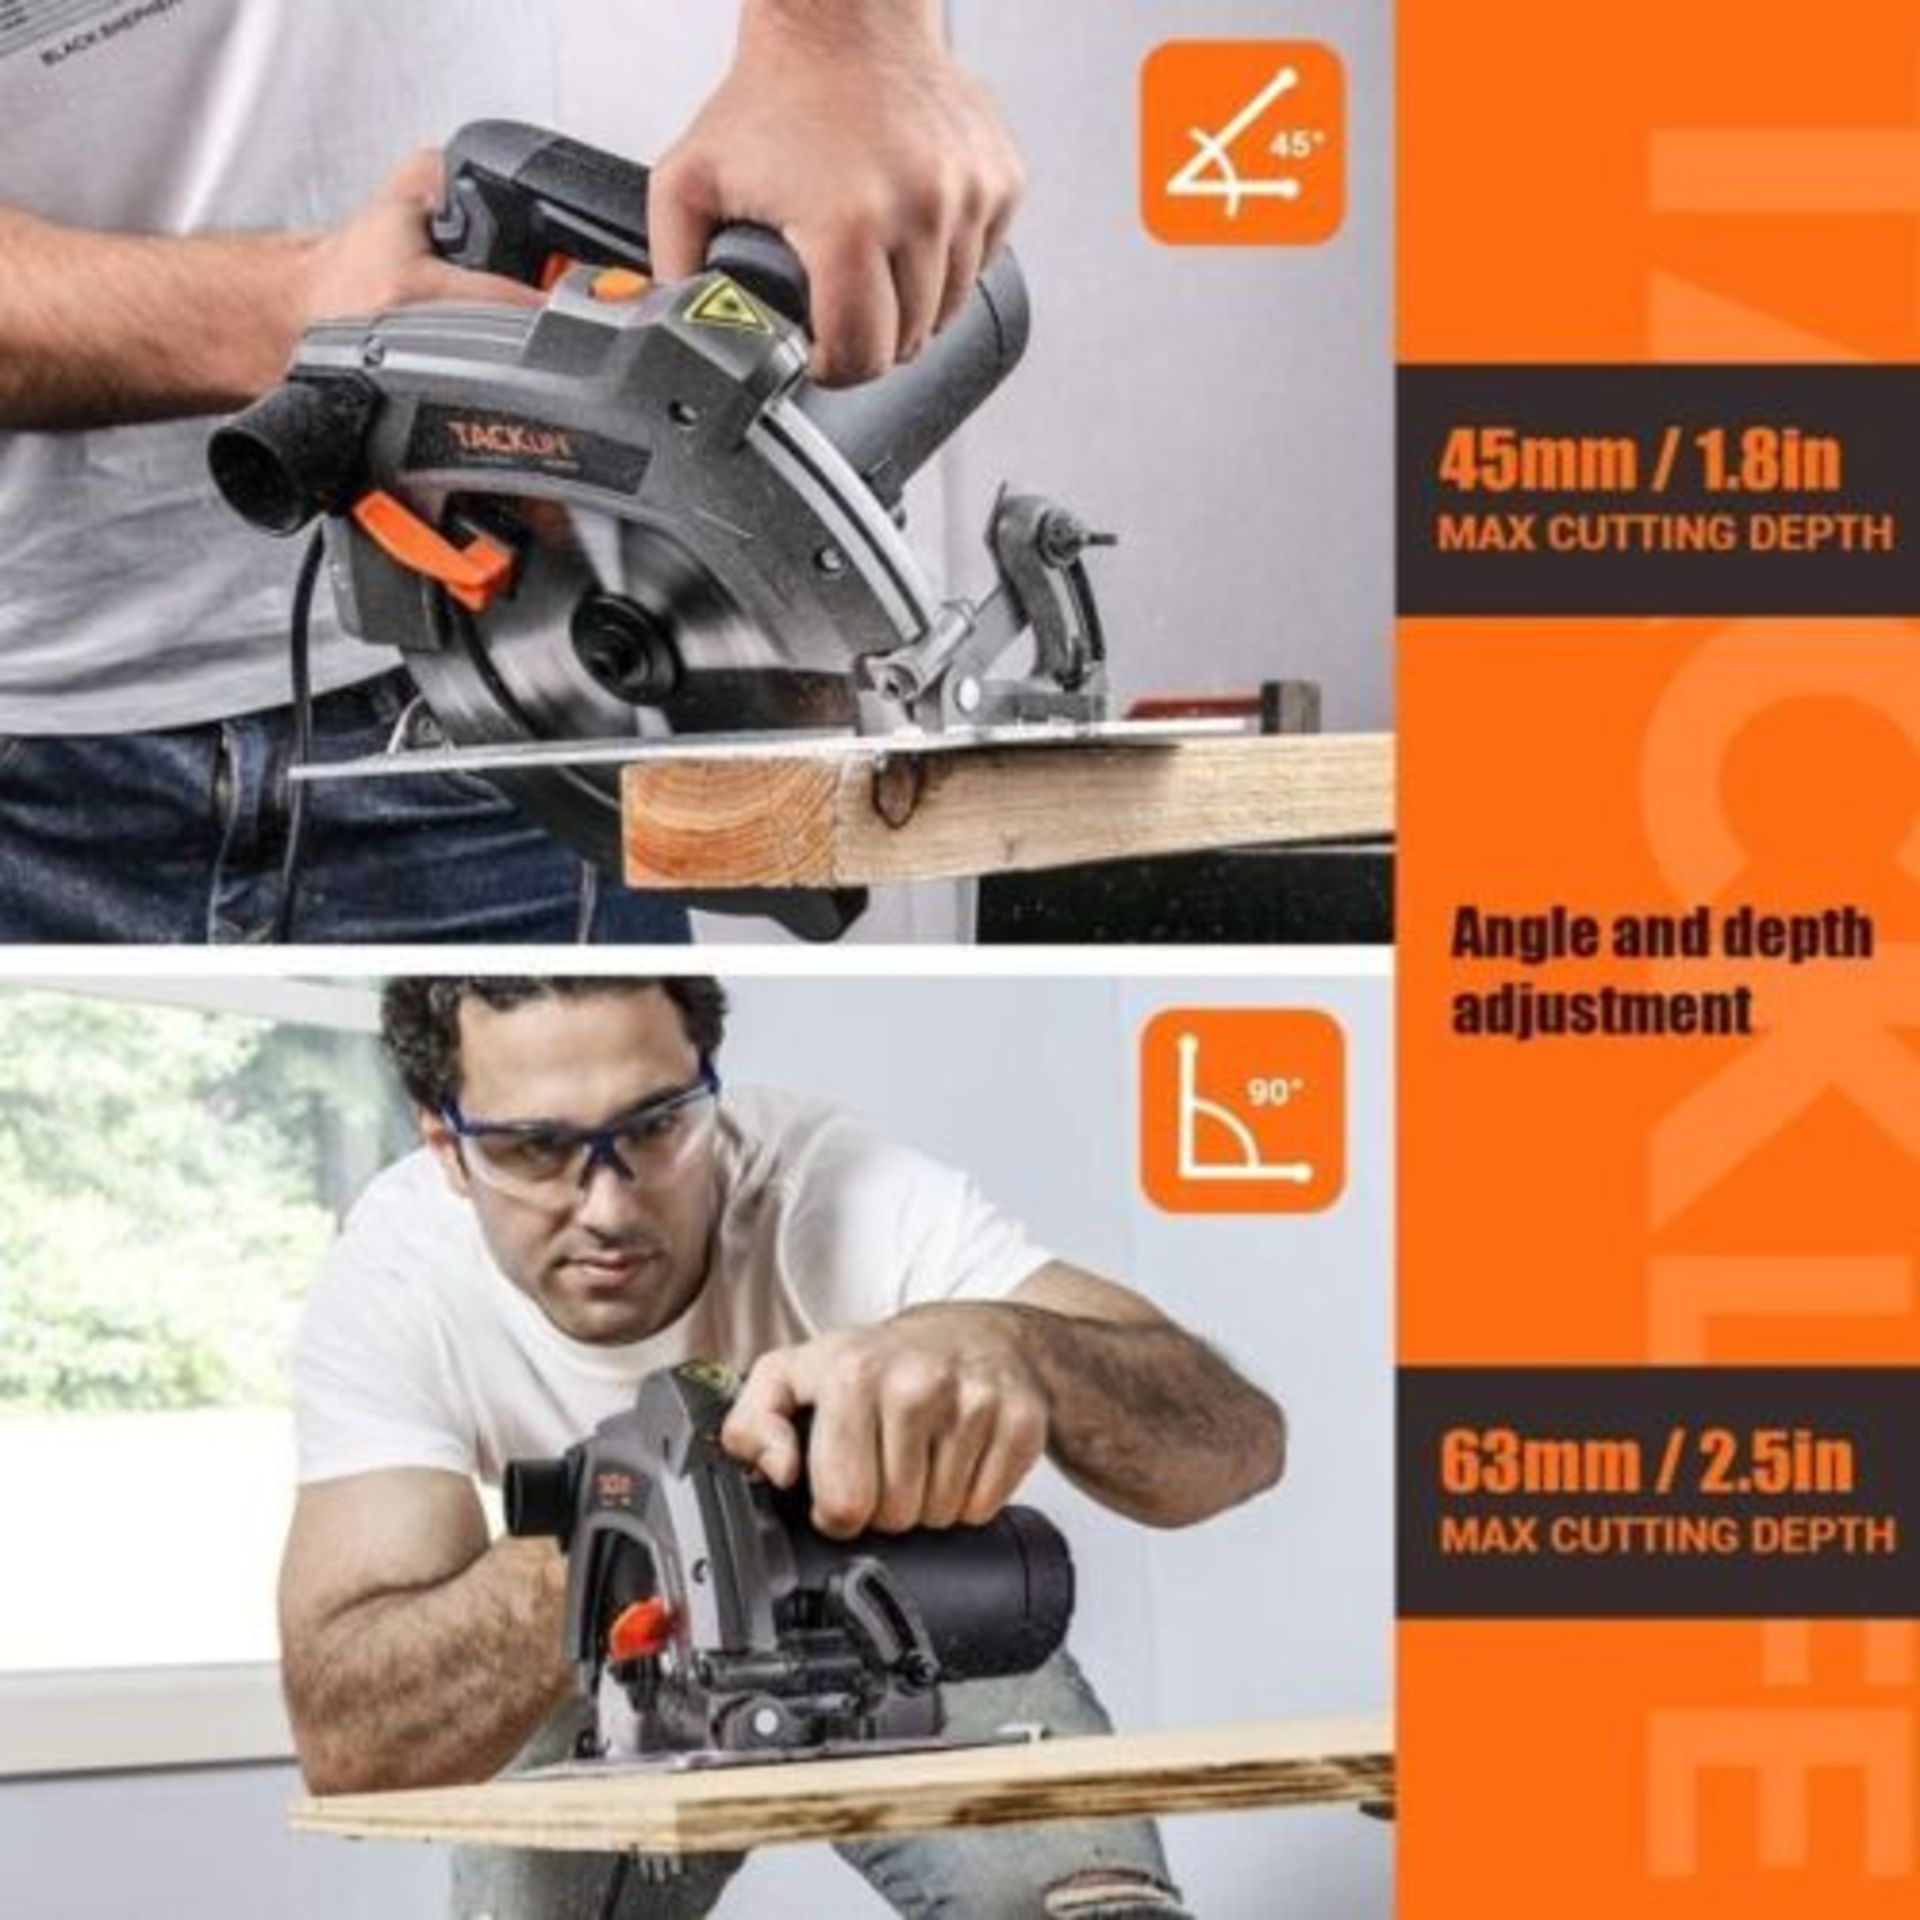 10 X NEW BOXED TACKLIFE Electric Circular Saw,1500W, 5000 RPM With Bevel Cuts 2-3/5''. (ROW 12) - Image 2 of 2